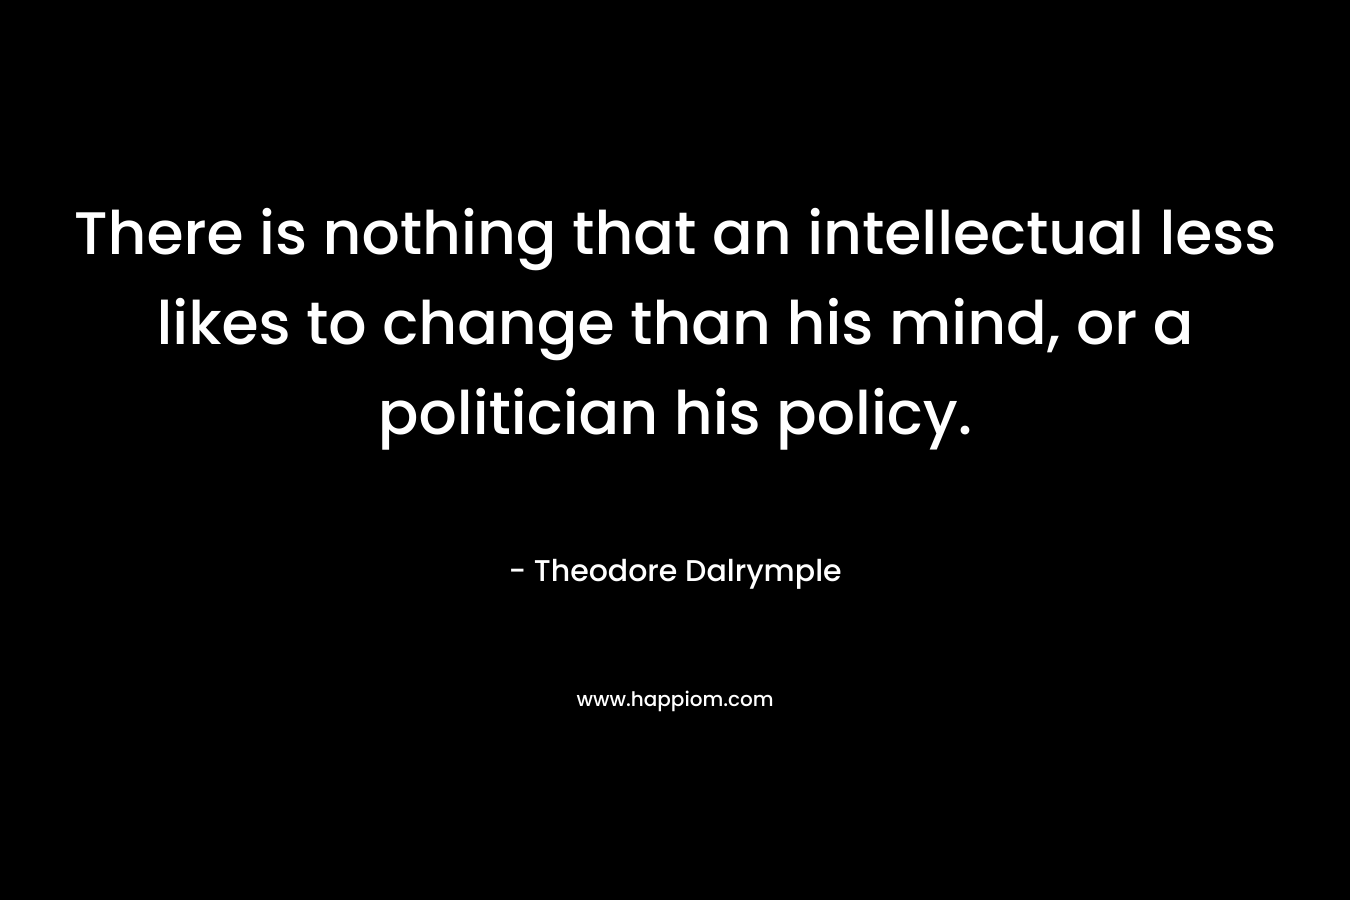 There is nothing that an intellectual less likes to change than his mind, or a politician his policy.